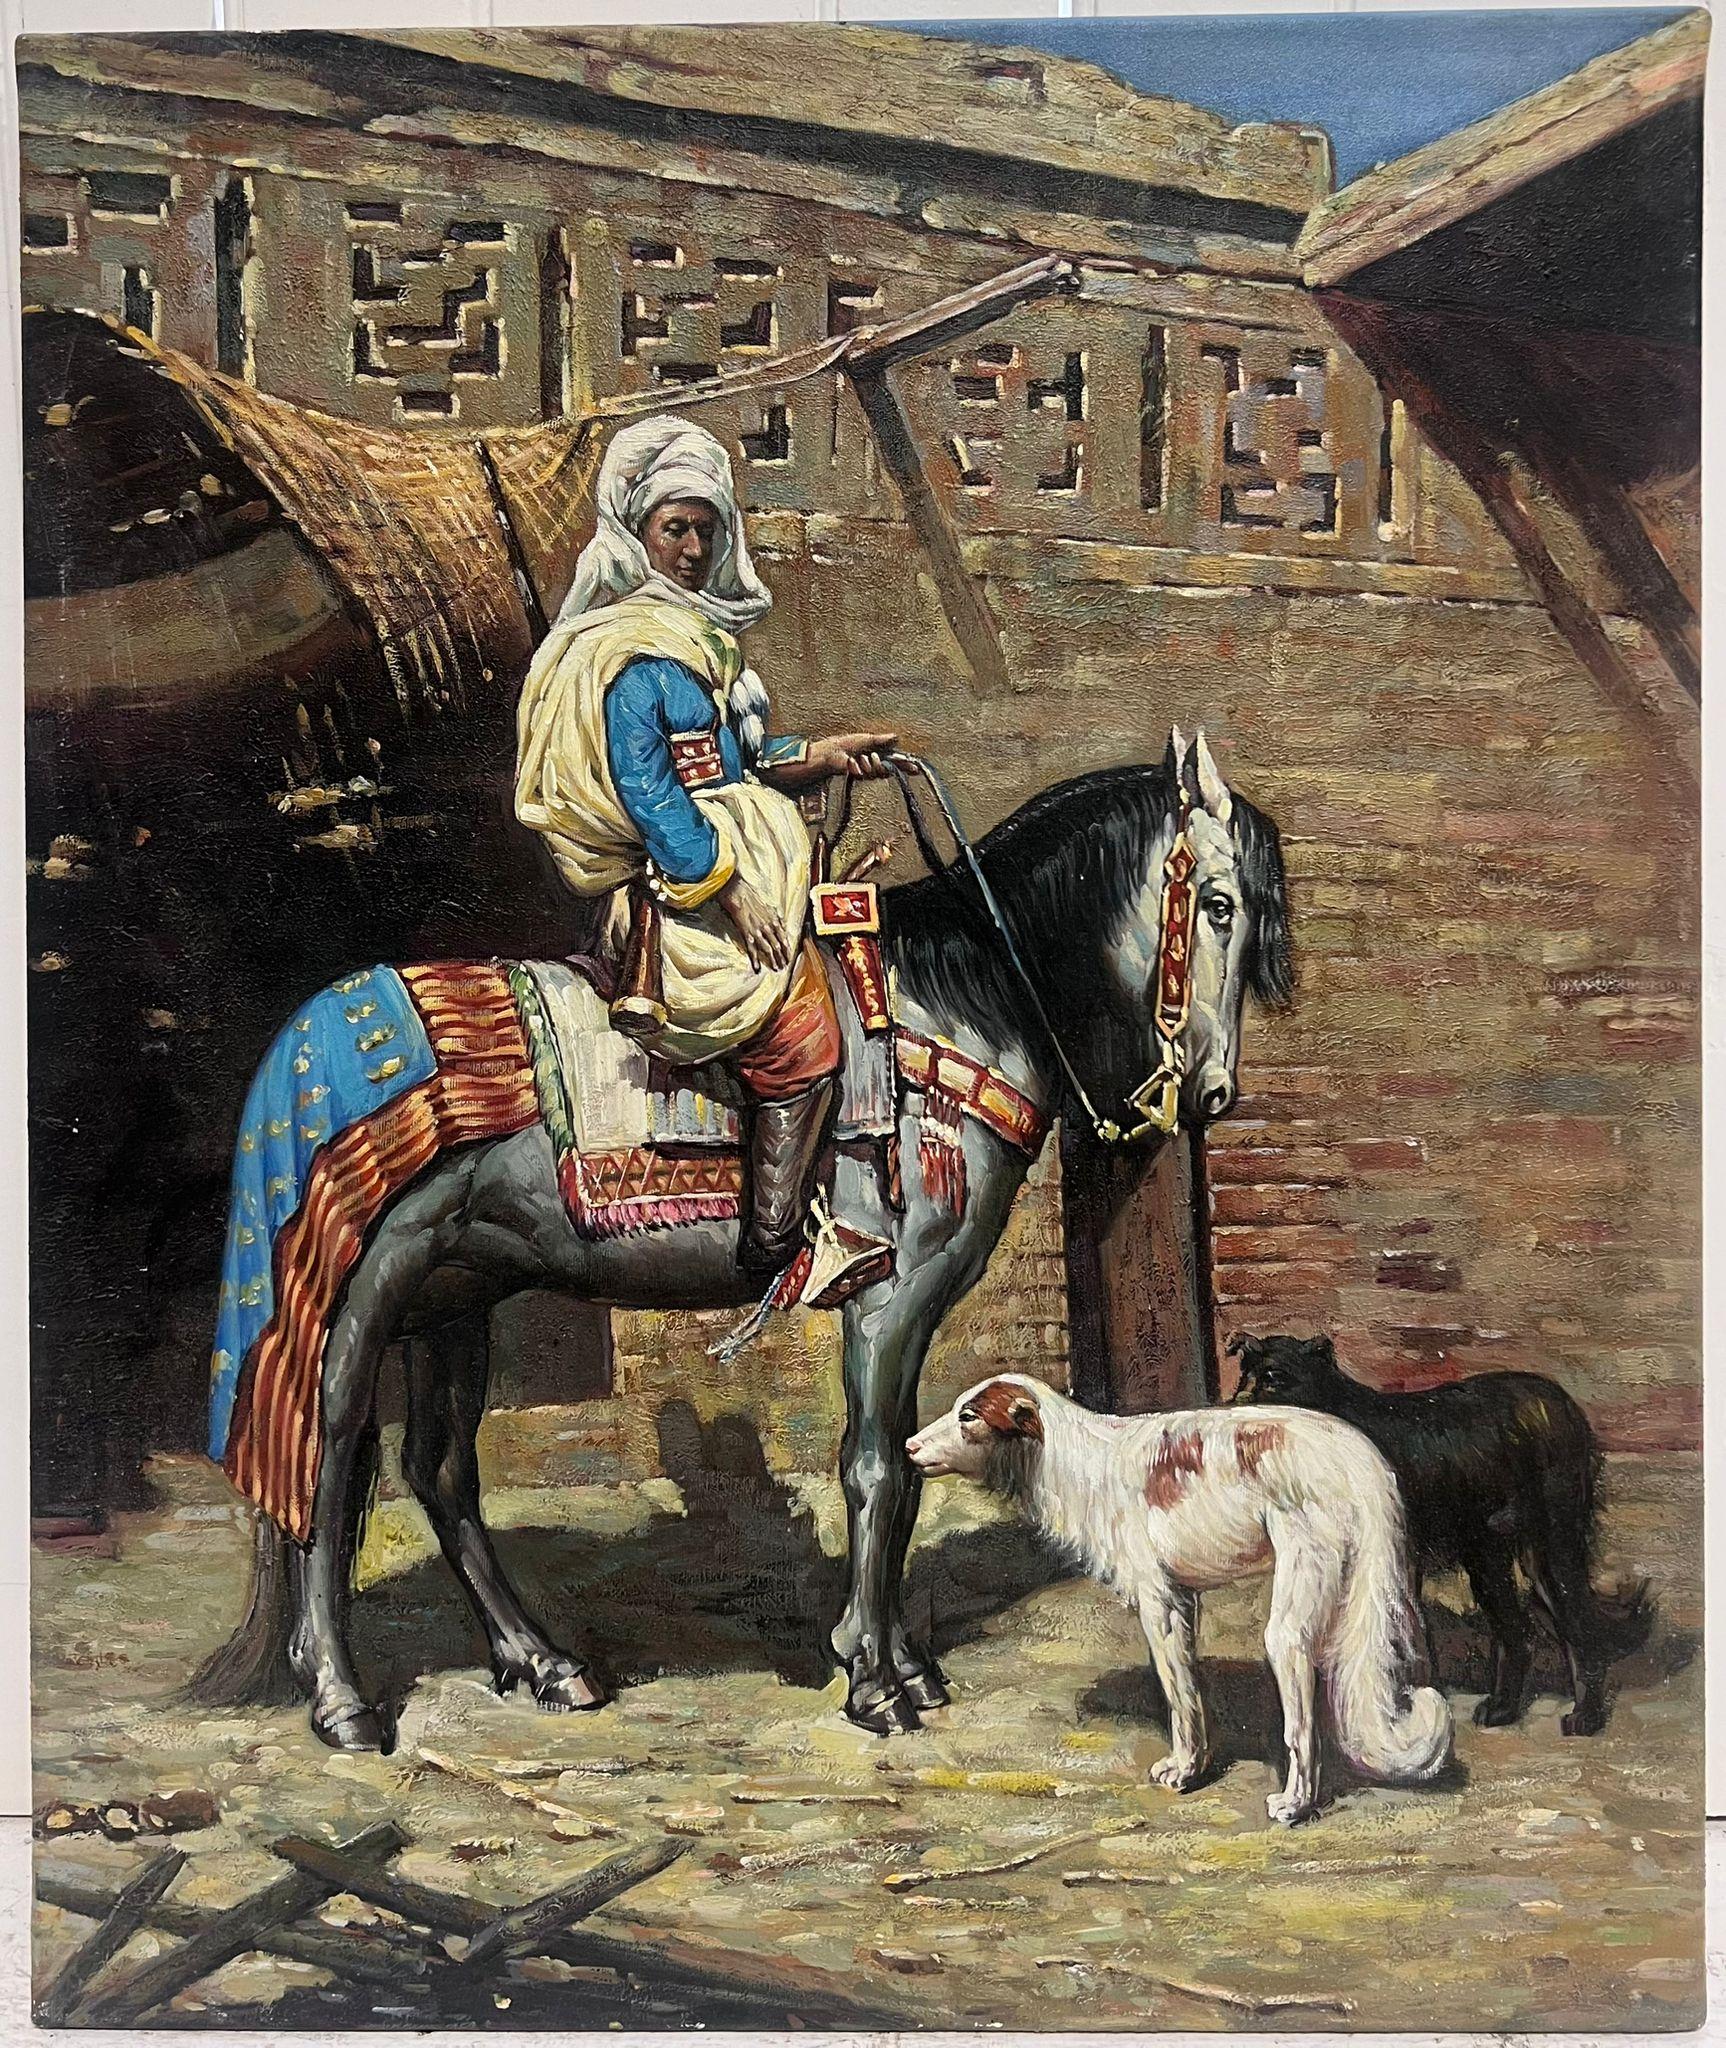 North African Orientalist Scene Man on Horseback with Dogs outside City Building - Painting by European Artist